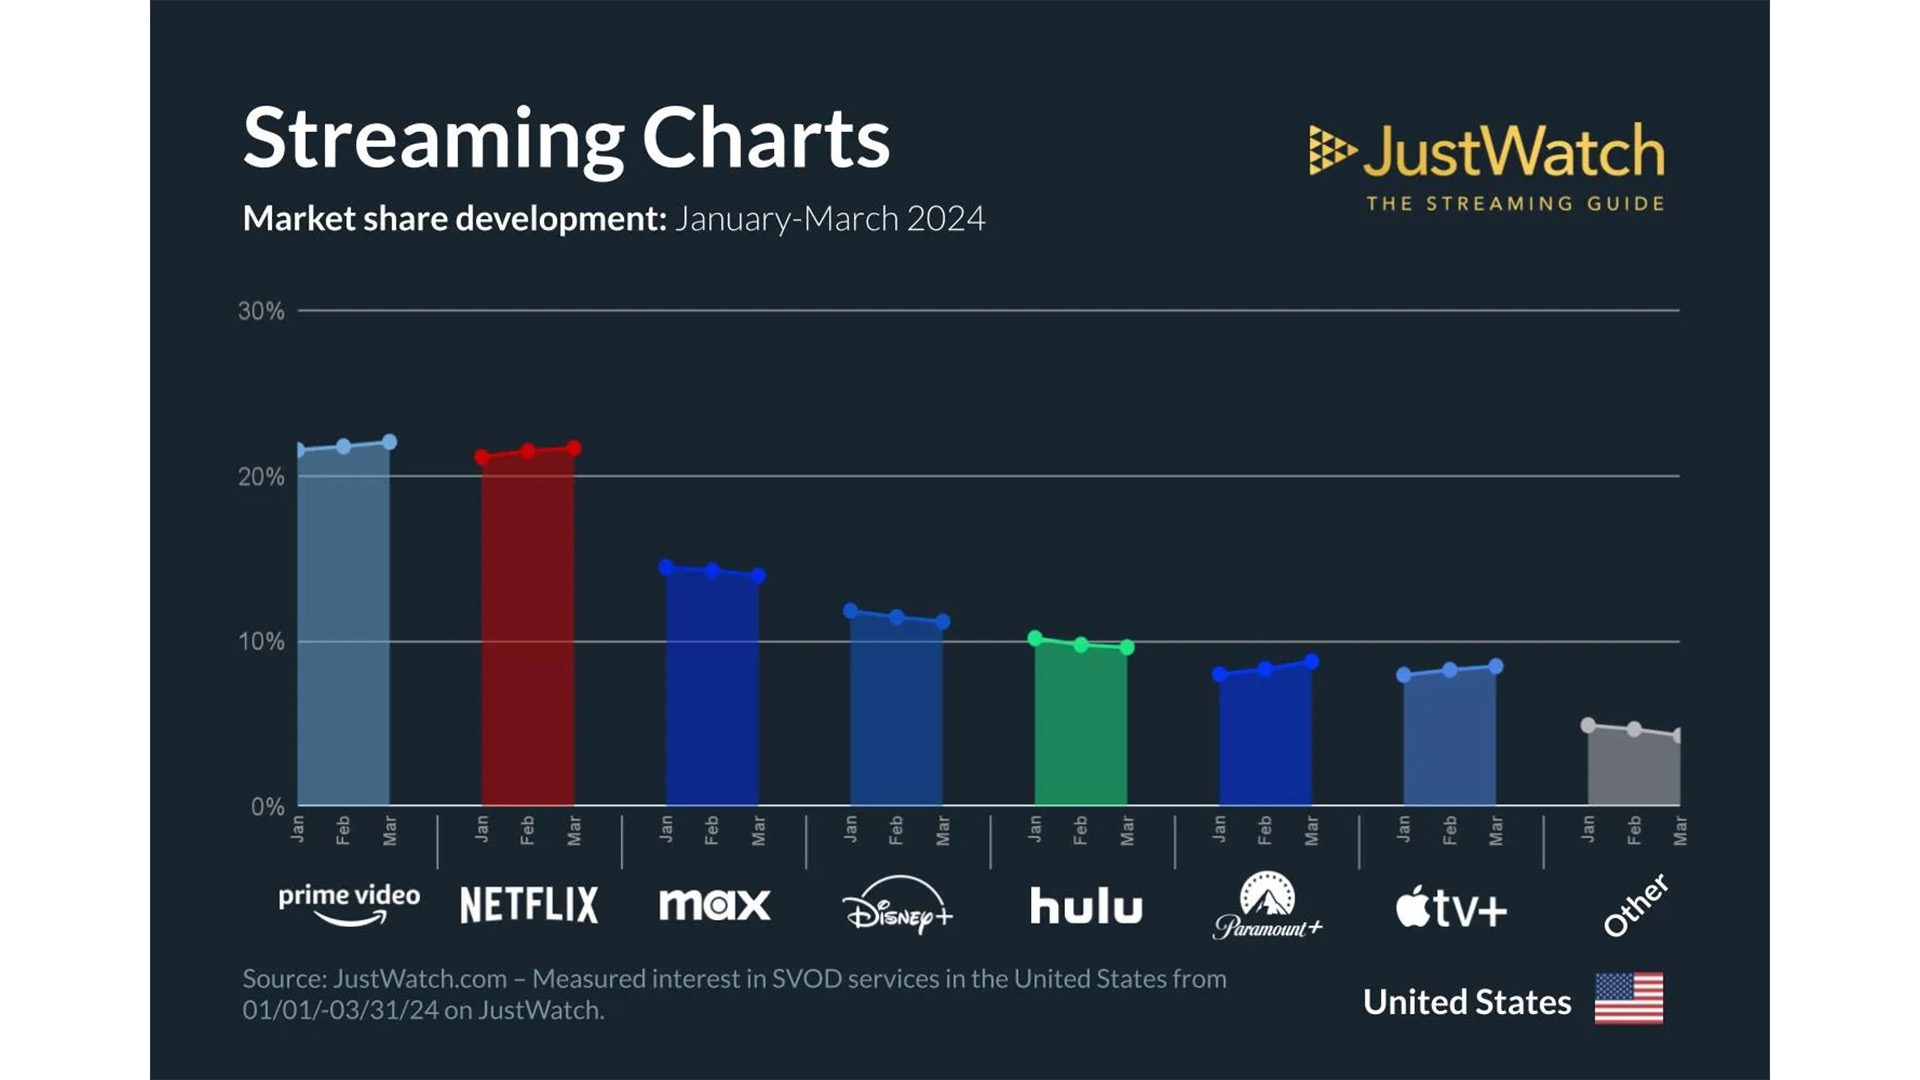 JustWatch Streaming Charts for Q1